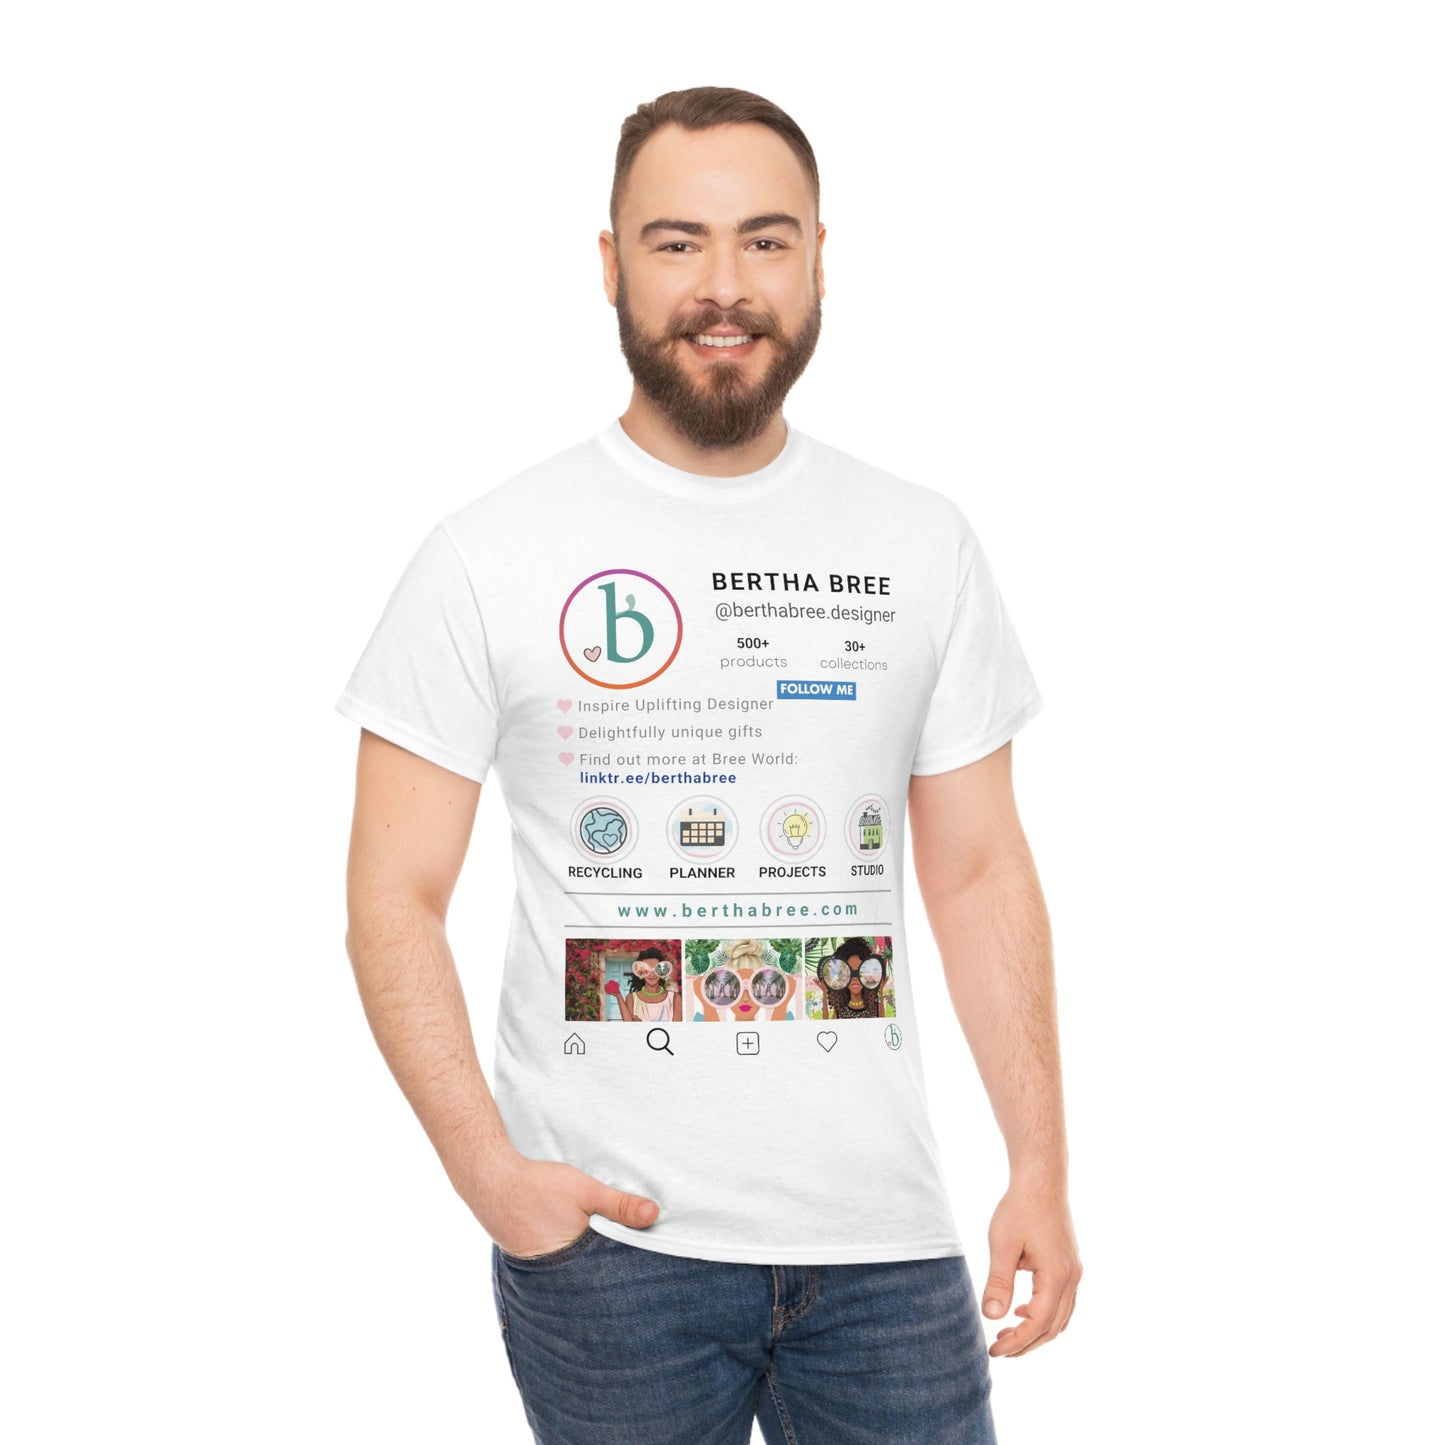 INSTAGRAM PERSONALIZED T-SHIRT